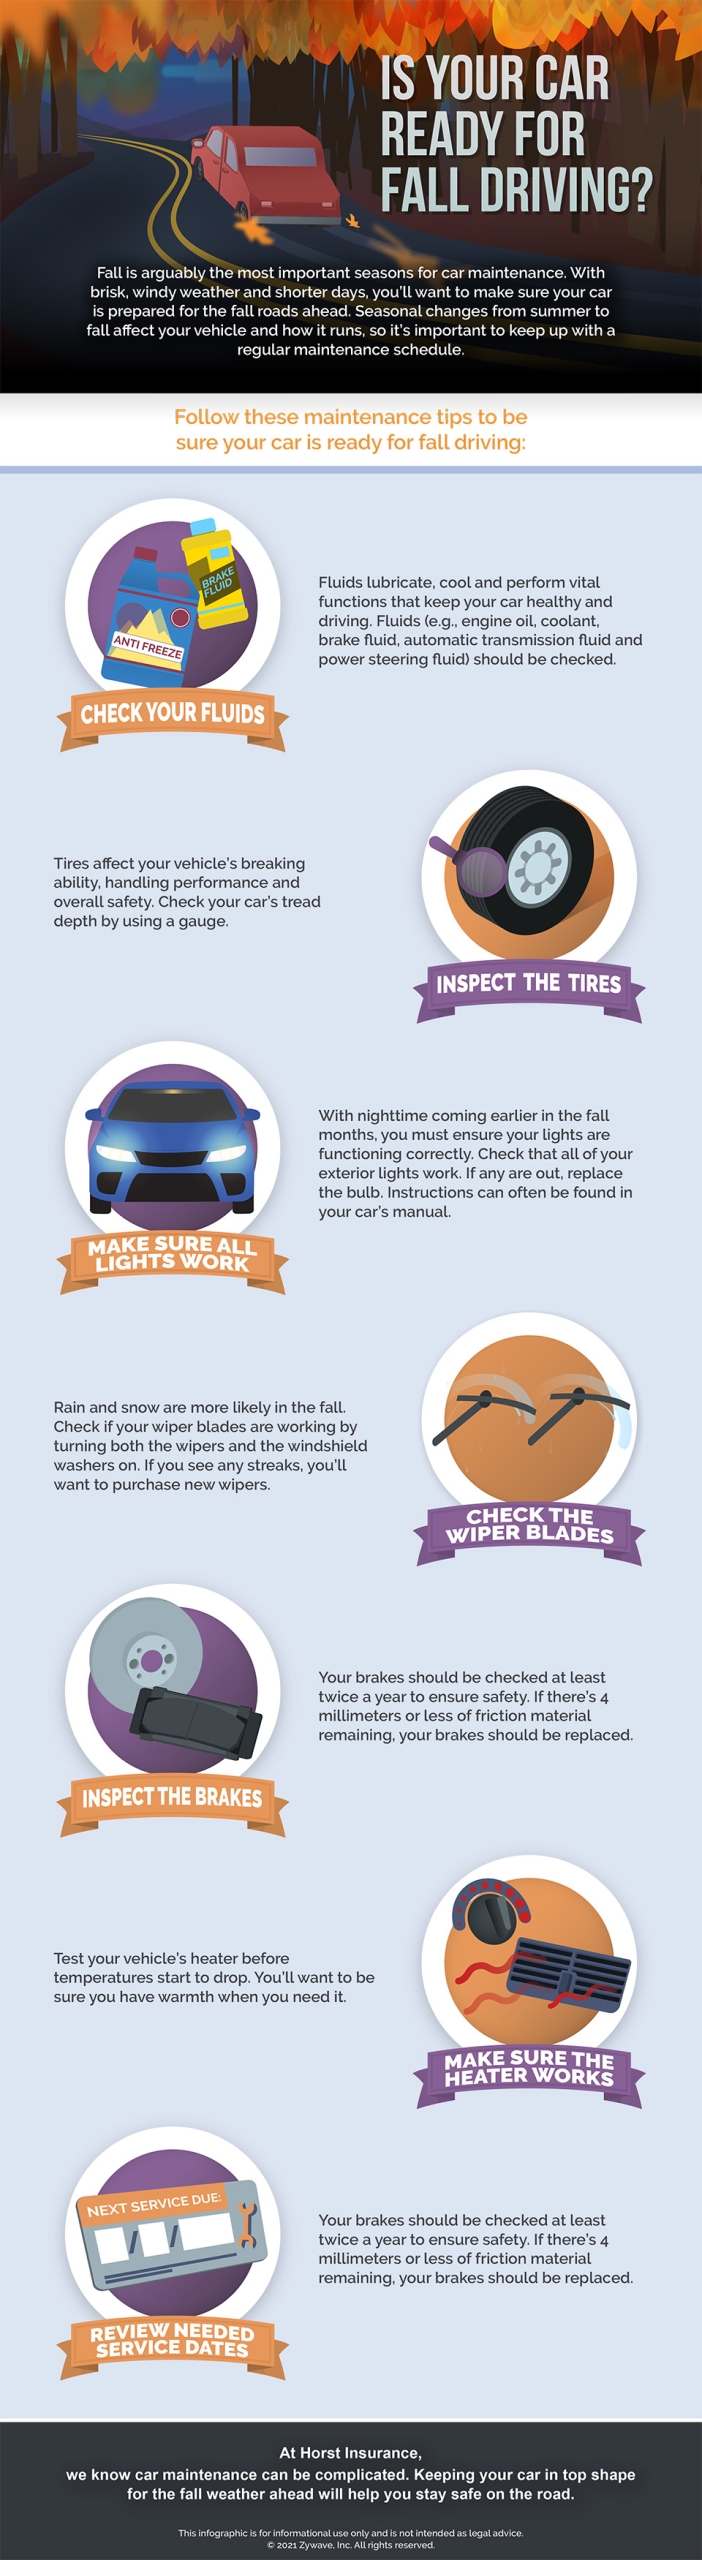 Infographic about preparing your car for fall driving